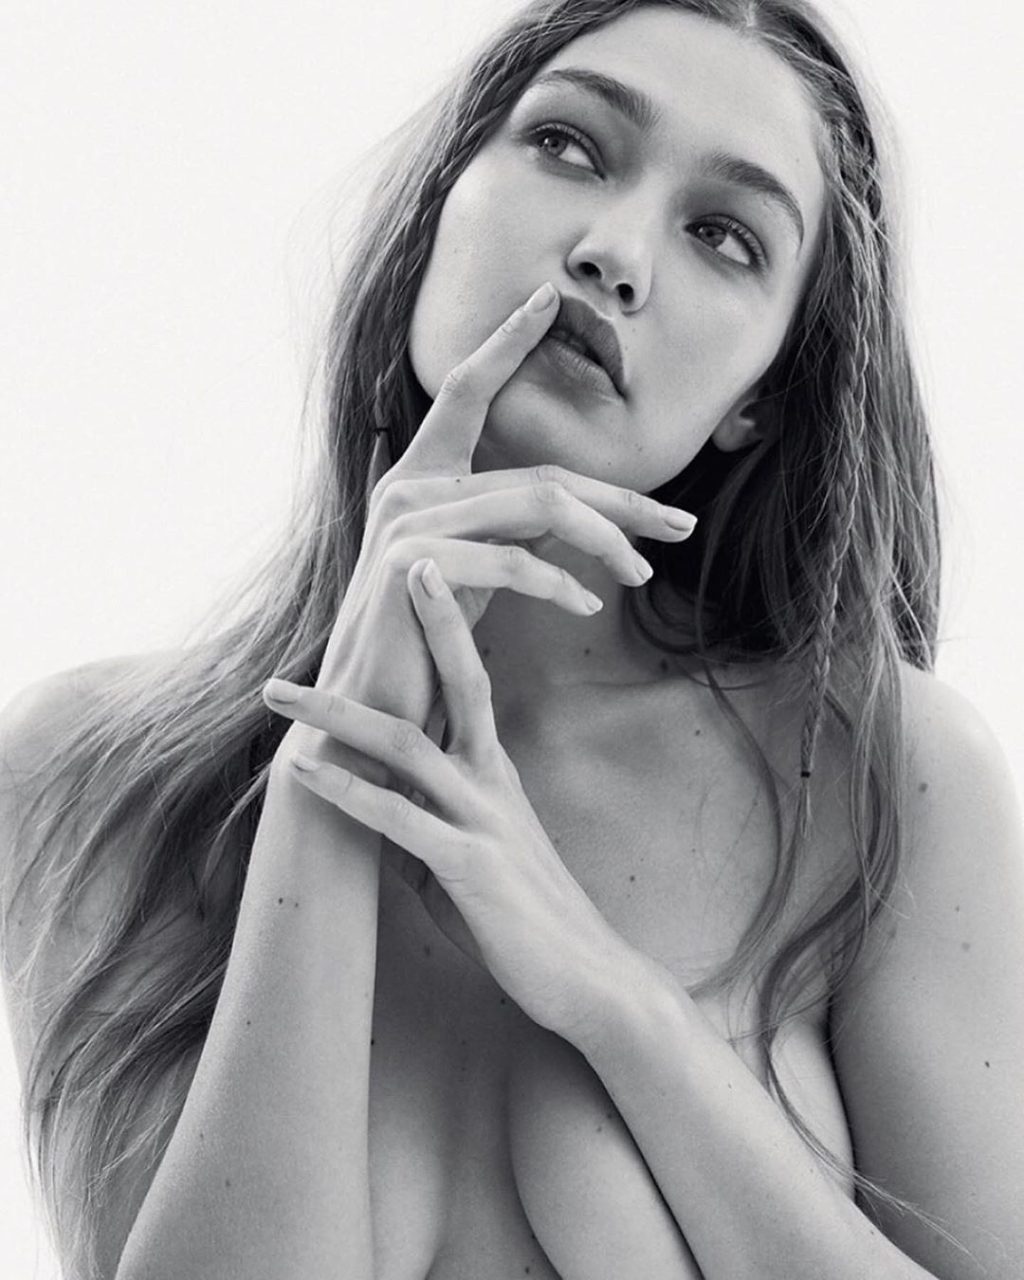 Gigi Hadid Photographed Nude for Russian Vogue (17 Photos)